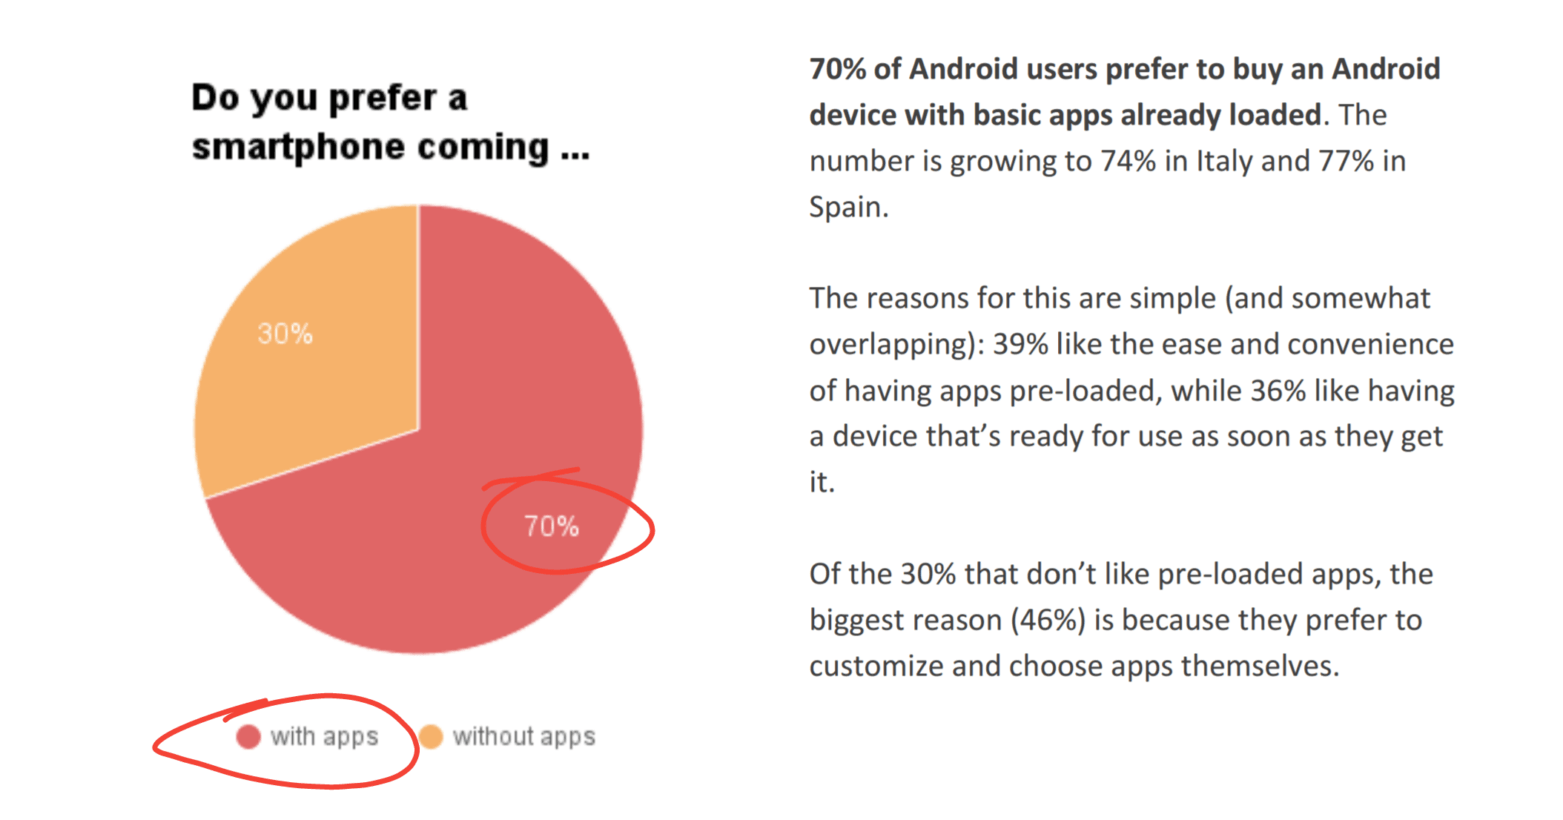 Study crazily suggests 70% of Android users want pre-installed apps